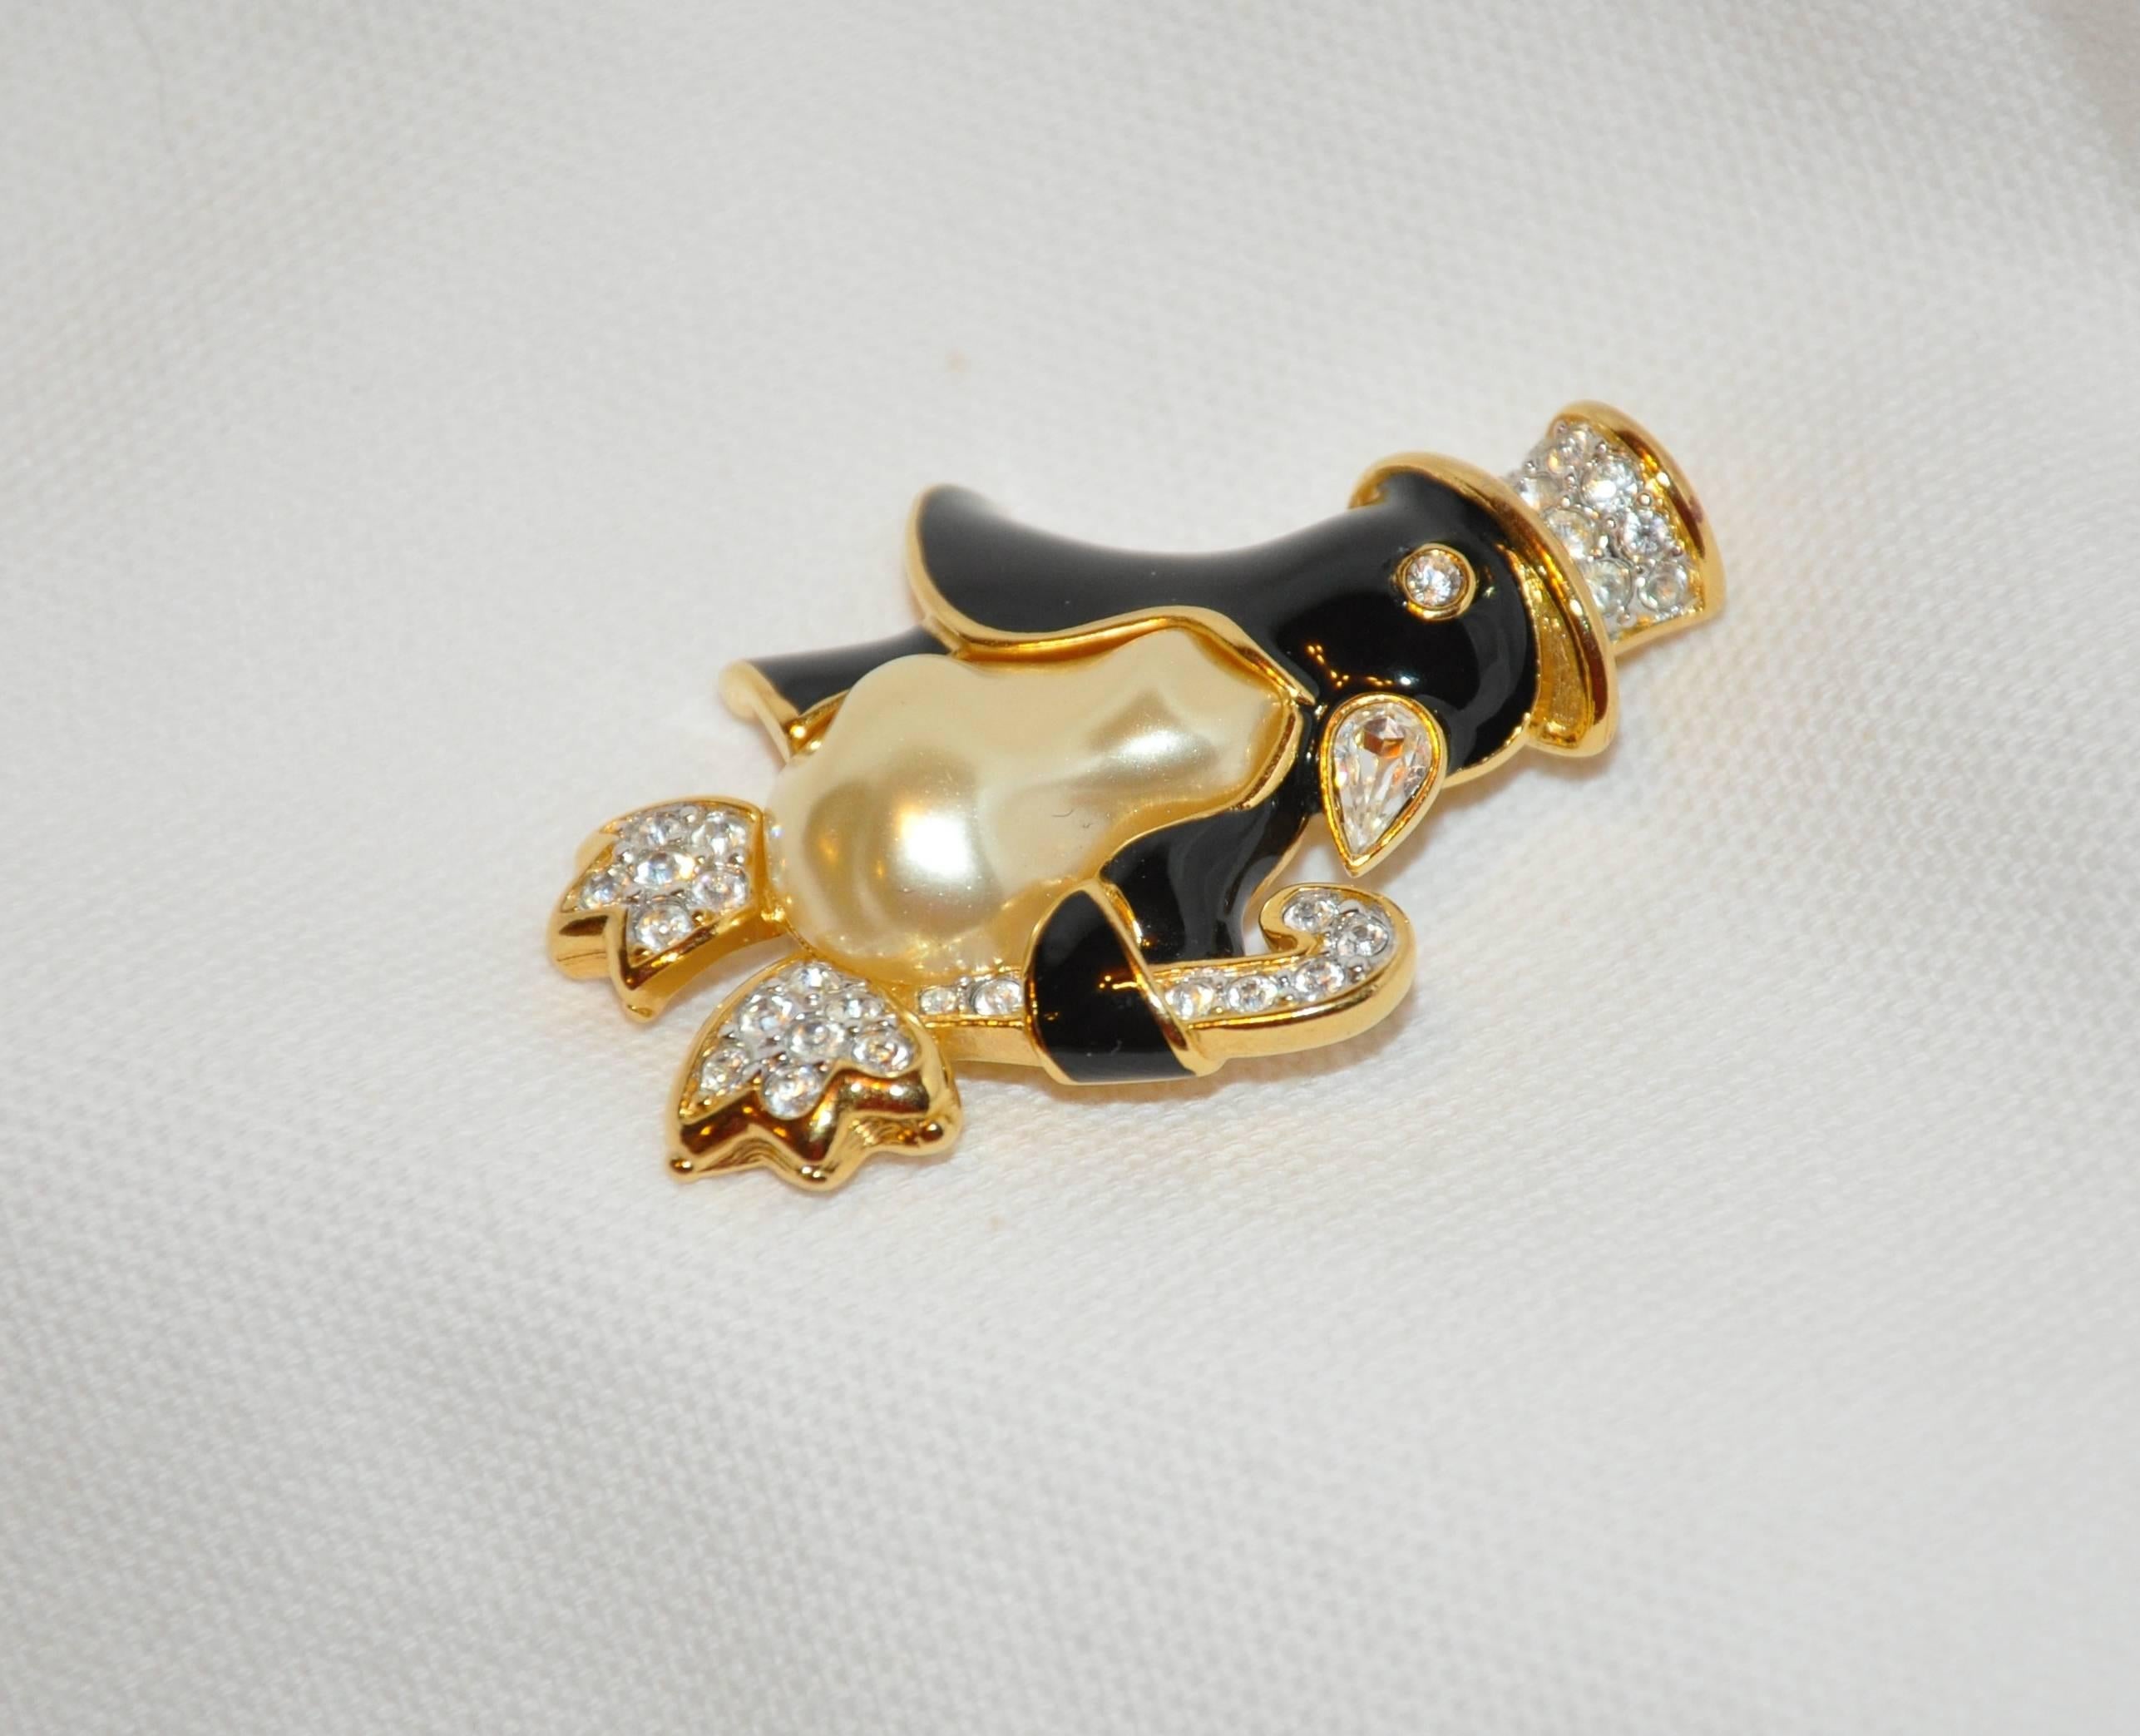        Kenneth Jay Lane's wonderfully whimsical "Penguin with Top Hat" brooch set in polished gilded gold vermeil hardware accented with faux pearl and faux diamond measures 1 6/8 inches in length, width measures 1 3/8 inches, depth is 1/2